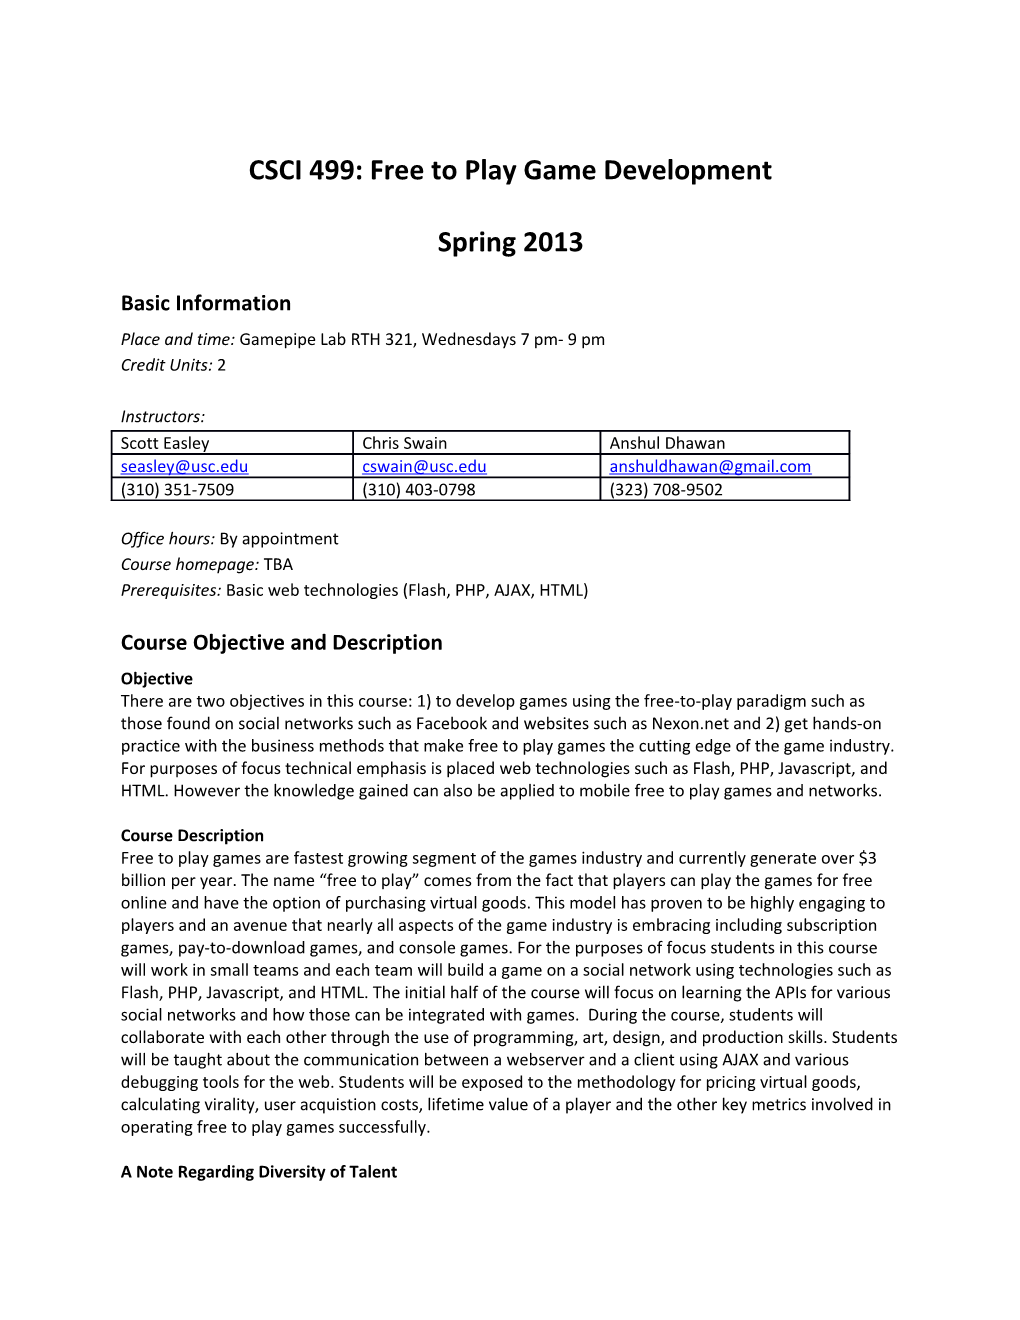 CSCI499: Free to Play Game Development Spring 2013